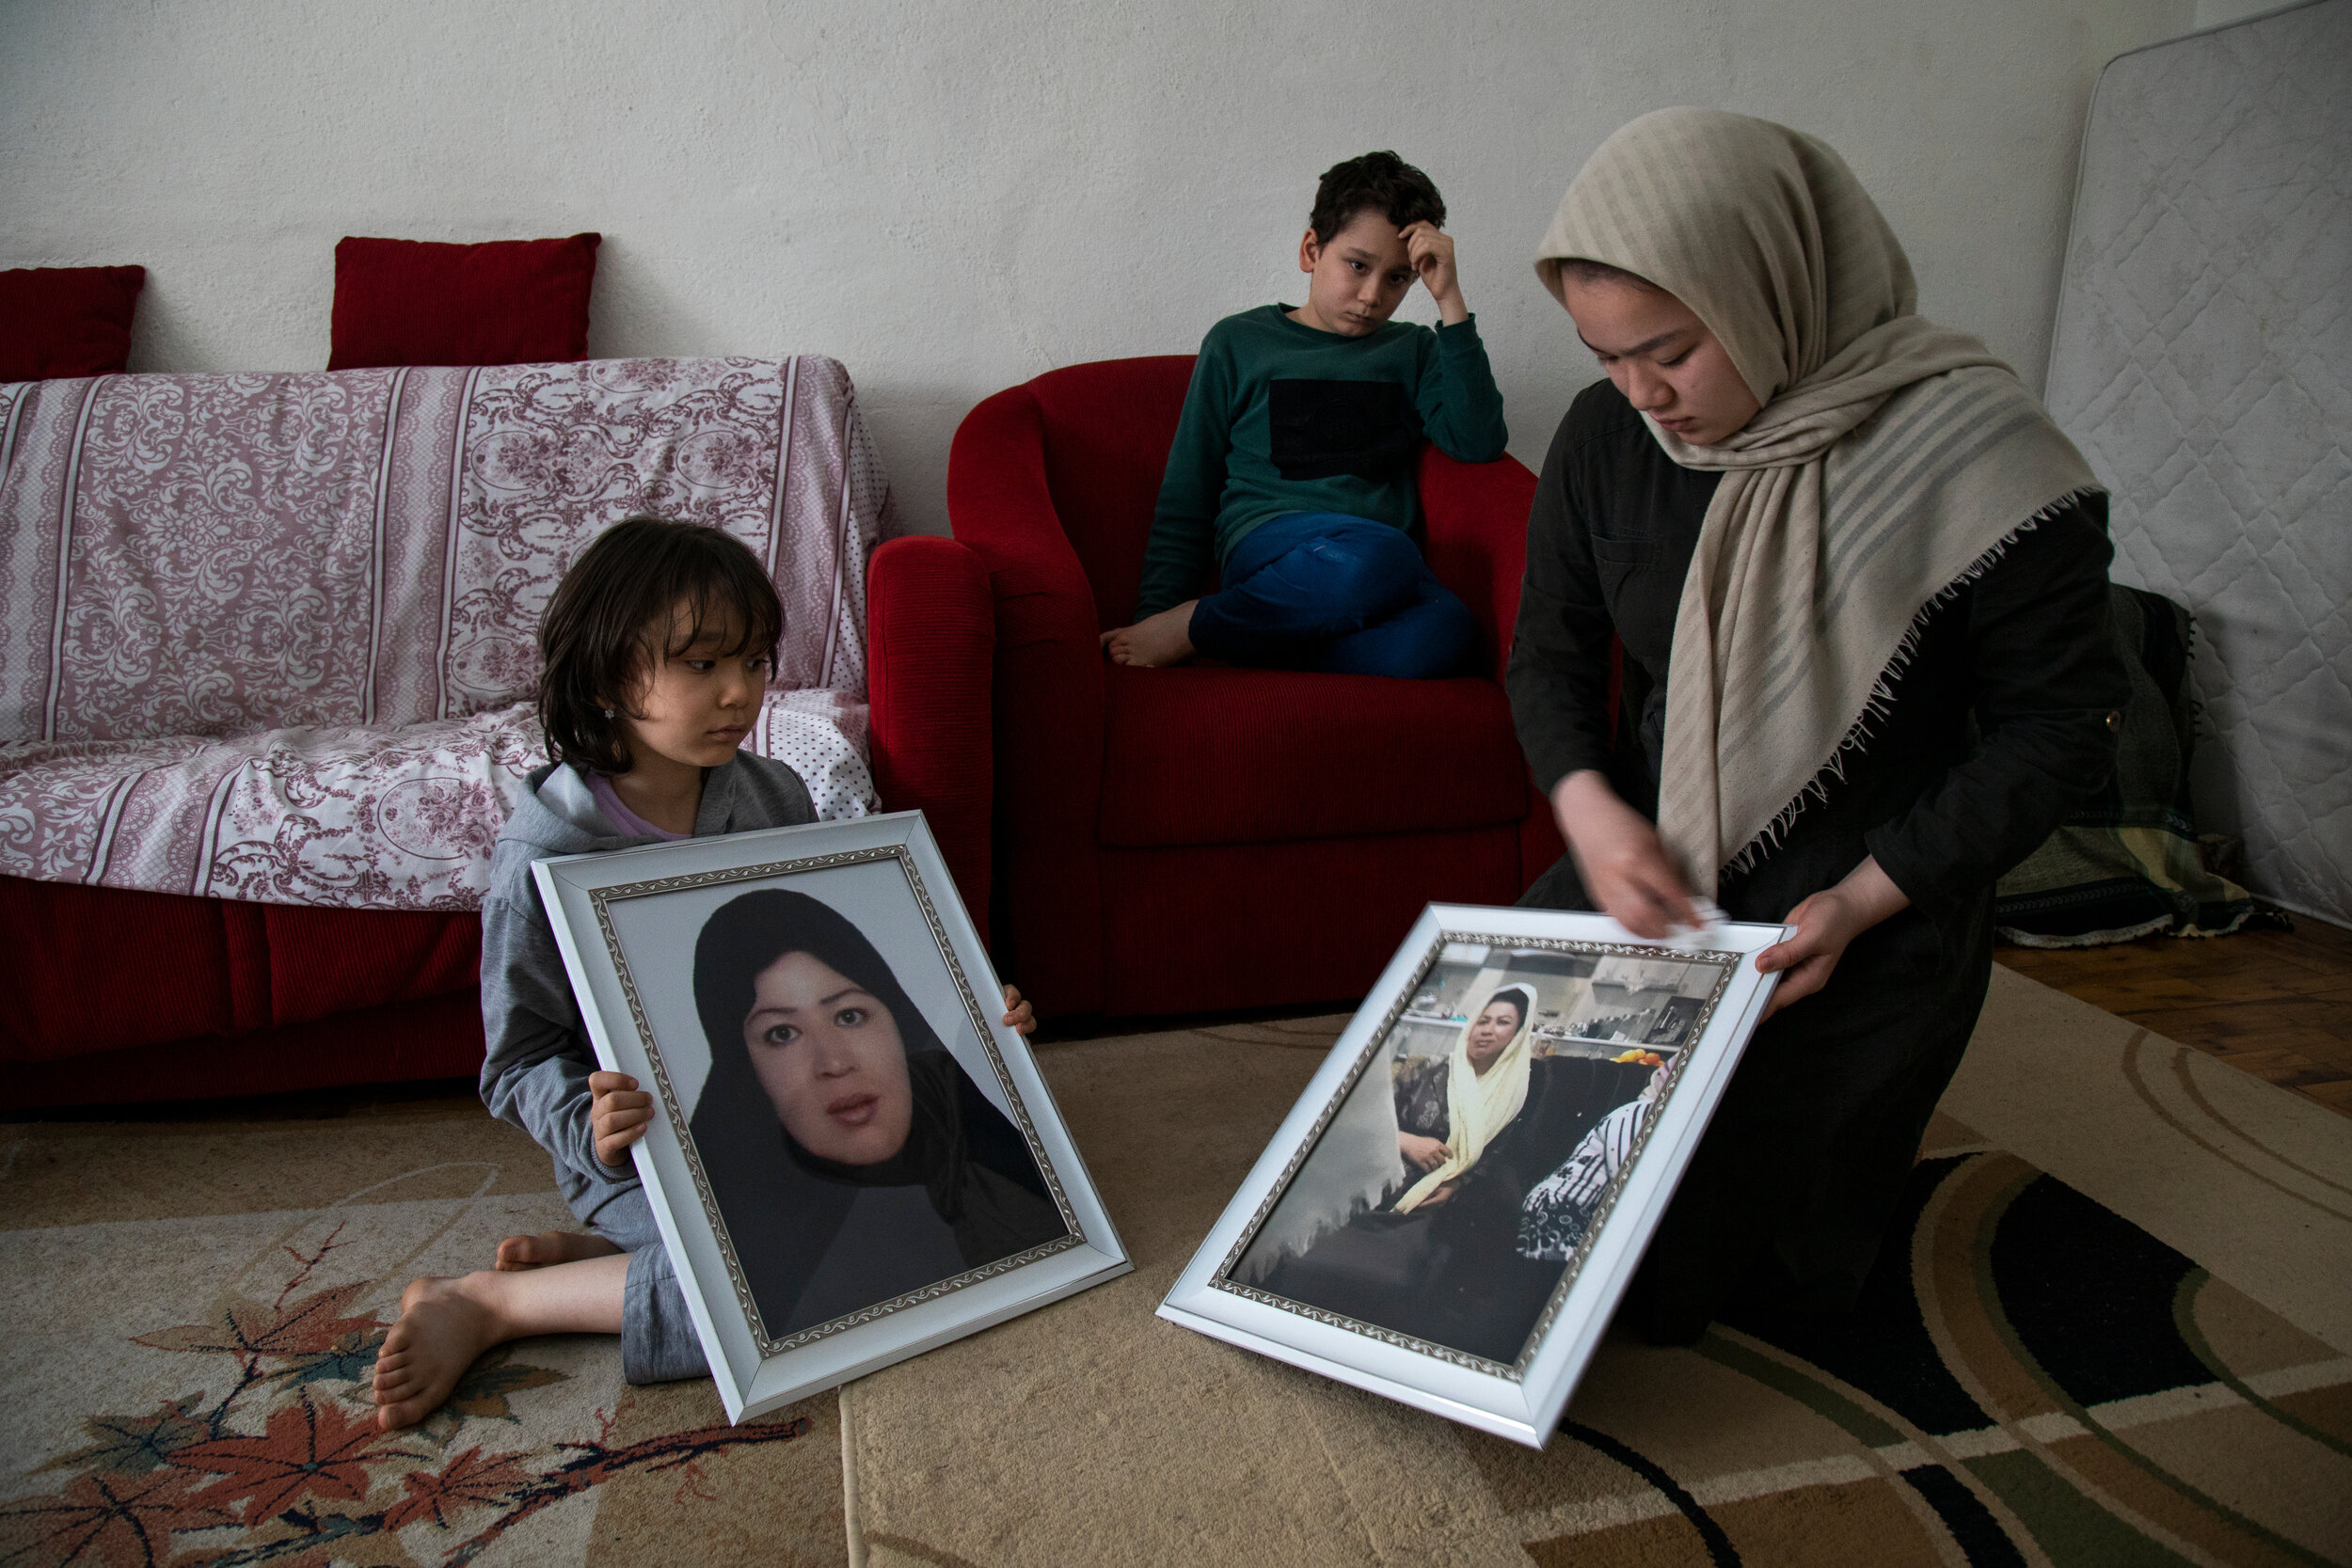  Afghan refugees Taiba, 7, Abdolhassan, 11, and Bahara, 14, clean photographs of her mother Roya.  They live with their father Muhammad in Turkey. While illegally crossing the Iran-Turkey border last year, they became separated from their mother. Her